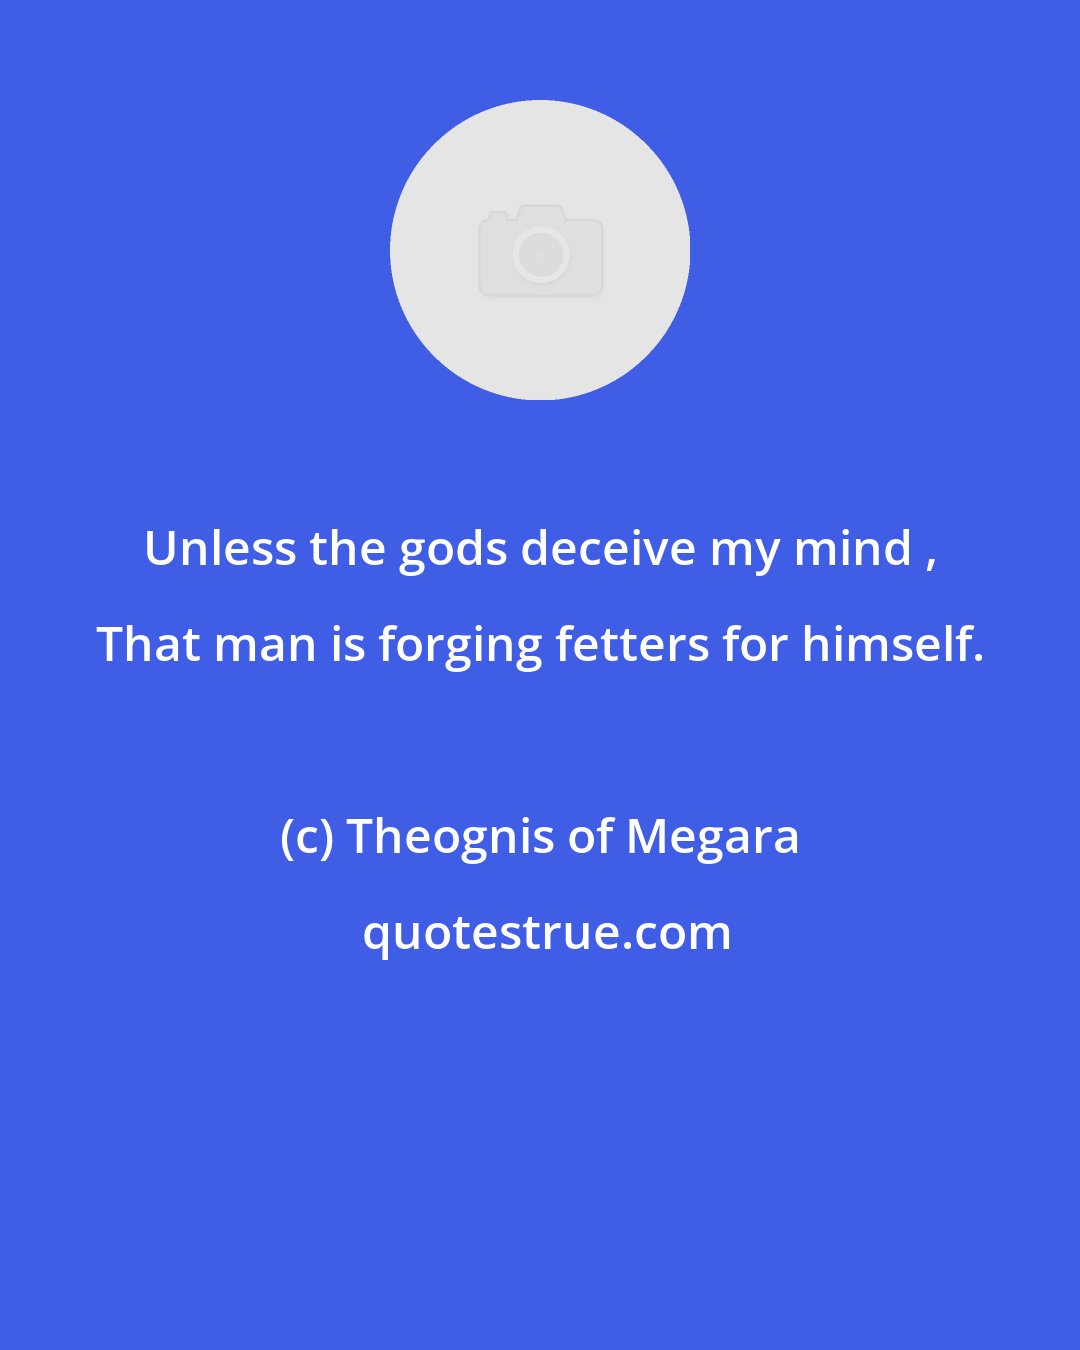 Theognis of Megara: Unless the gods deceive my mind , That man is forging fetters for himself.